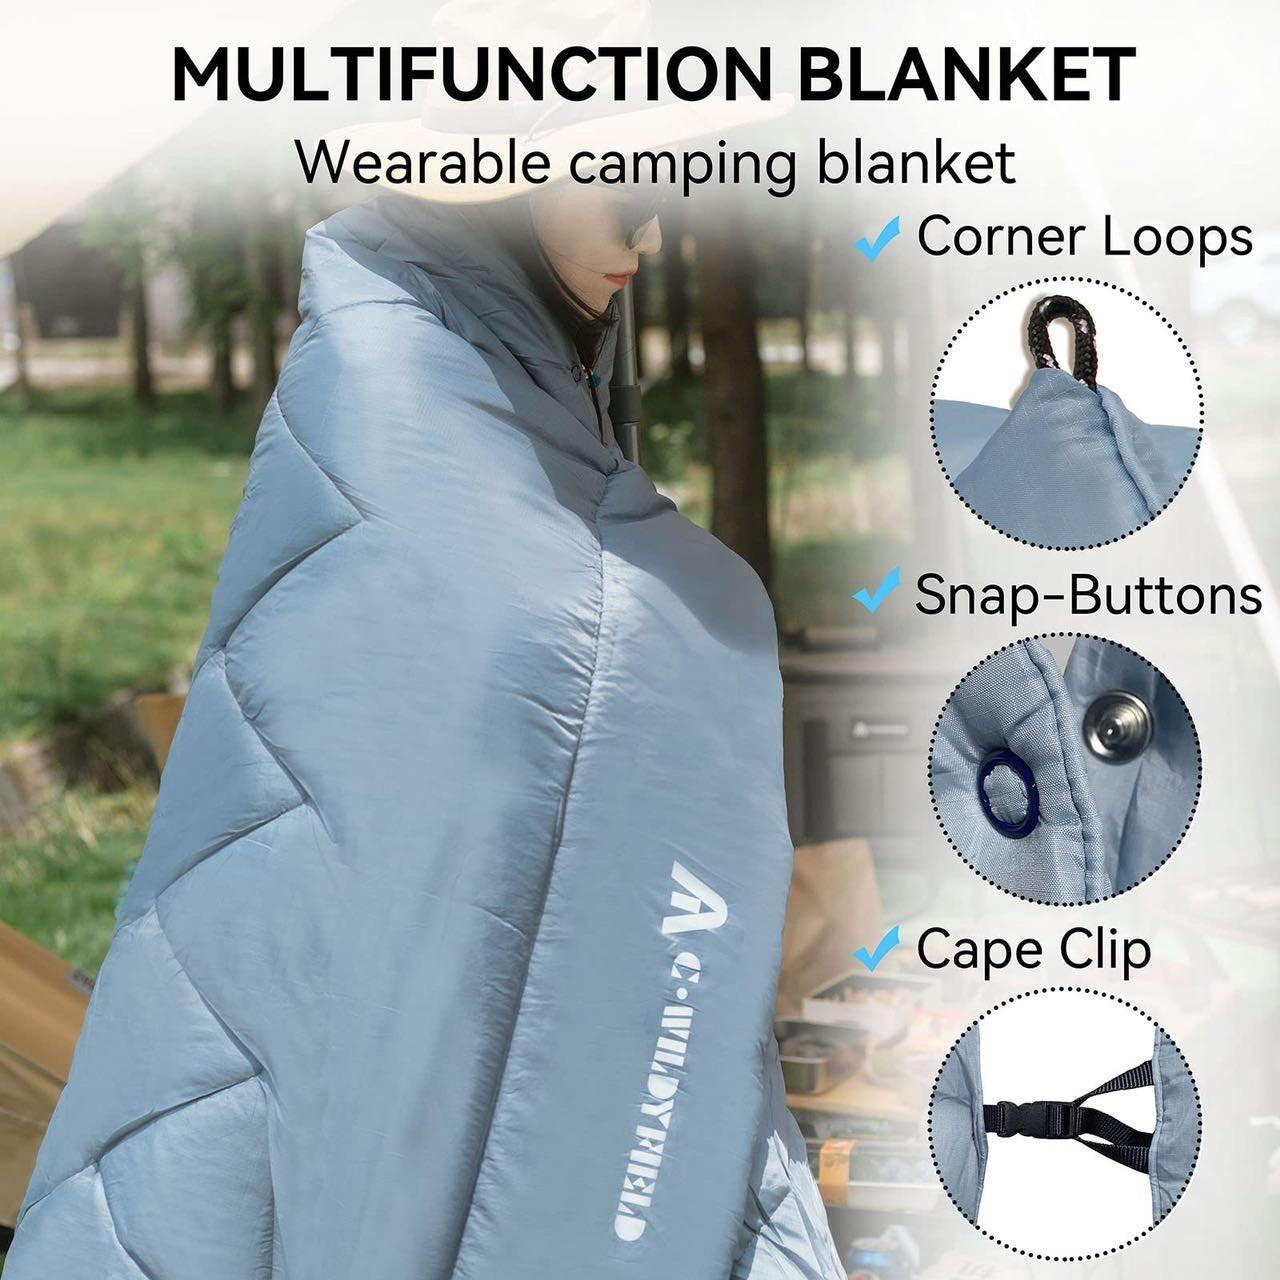 Multifunction blanket wearable camping blanketBring the comforts of home to the great outdoors with this multifunction wearable camping blanket! Made with a specifically designed fabric, this blanket offers all outdoorTOPDEALTOPDEALMultifunction blanket wearable camping blanket